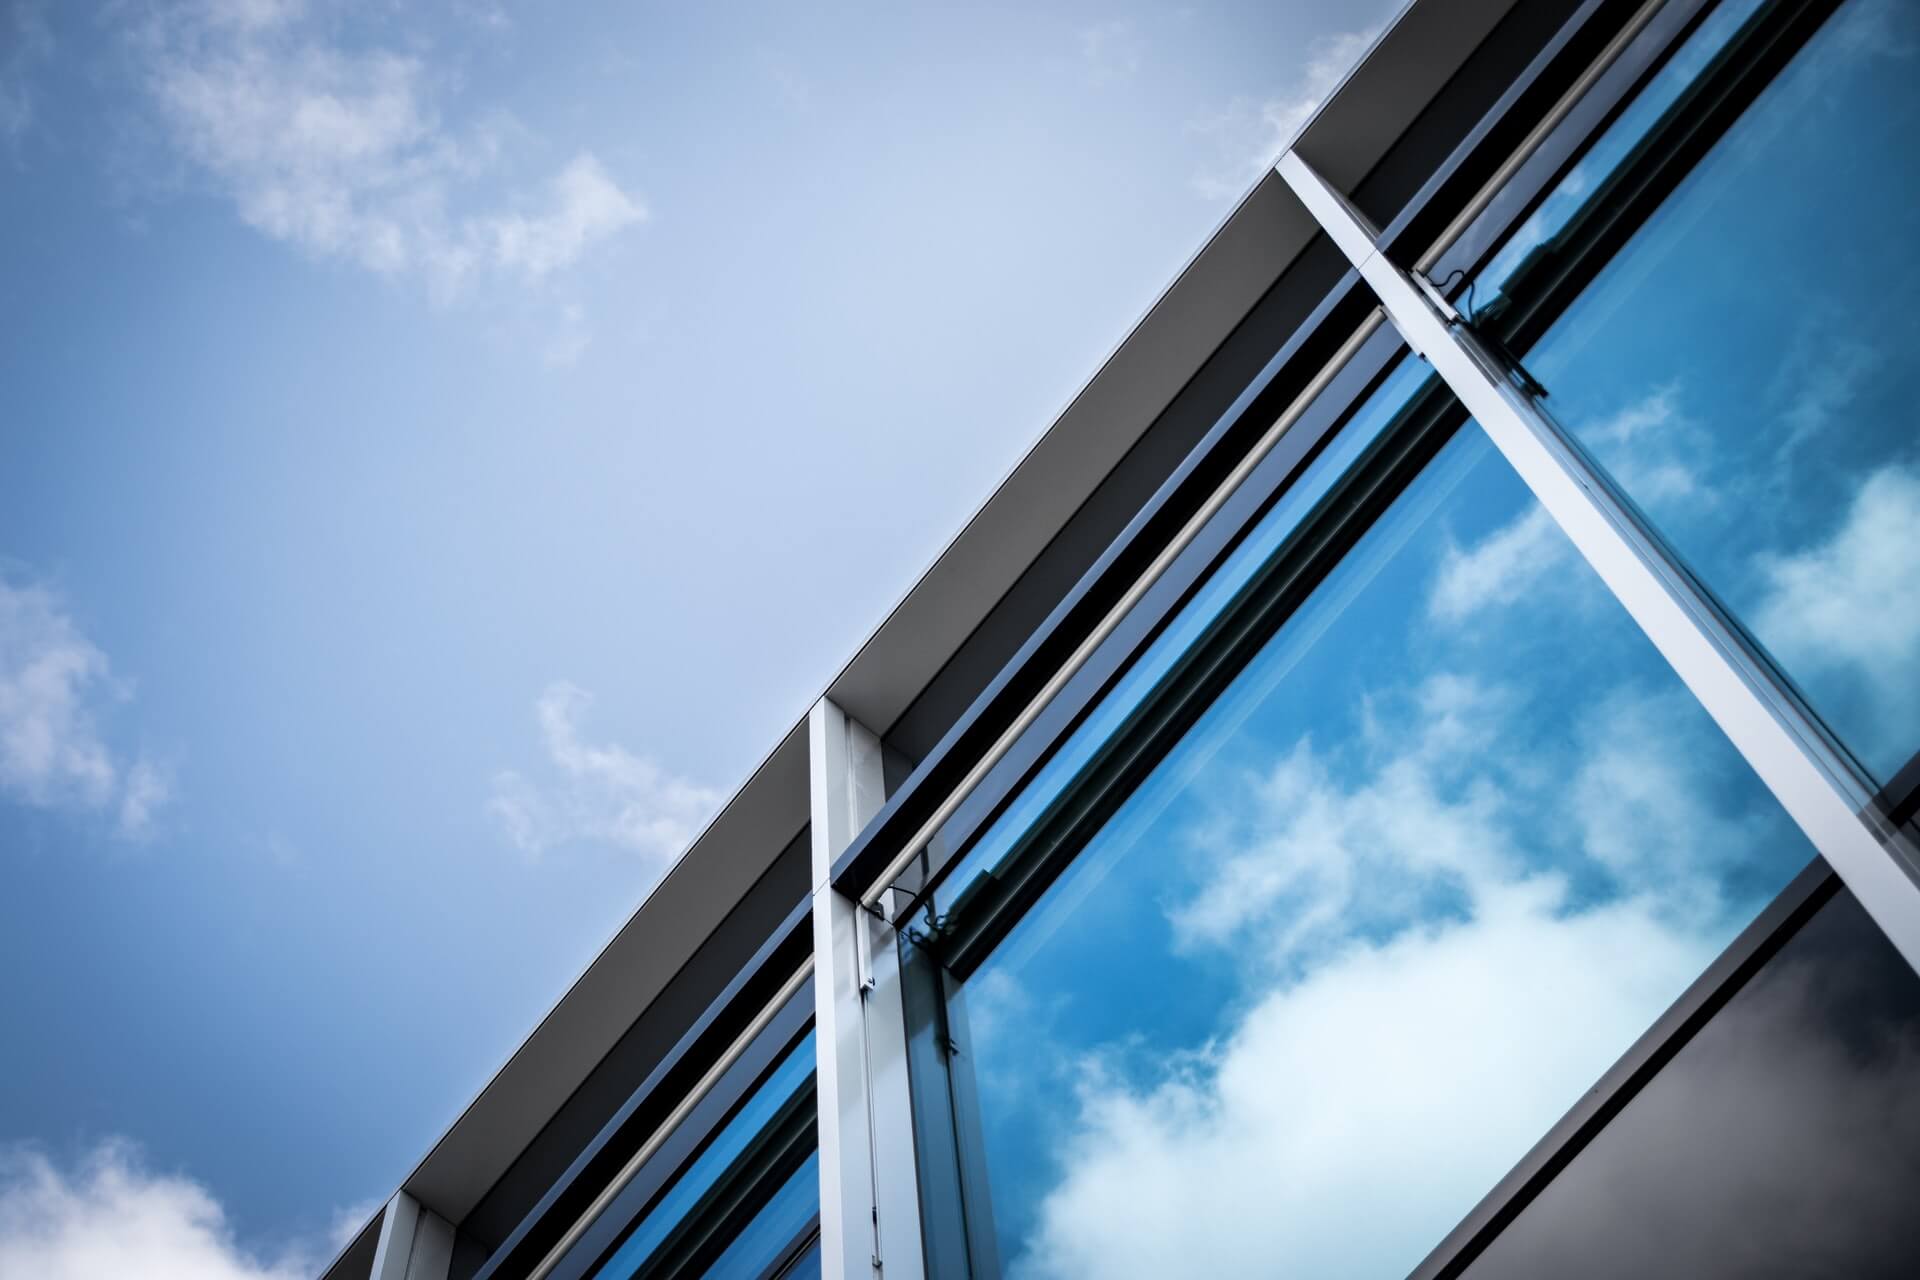 glass window panes reflecting blue sky and clouds